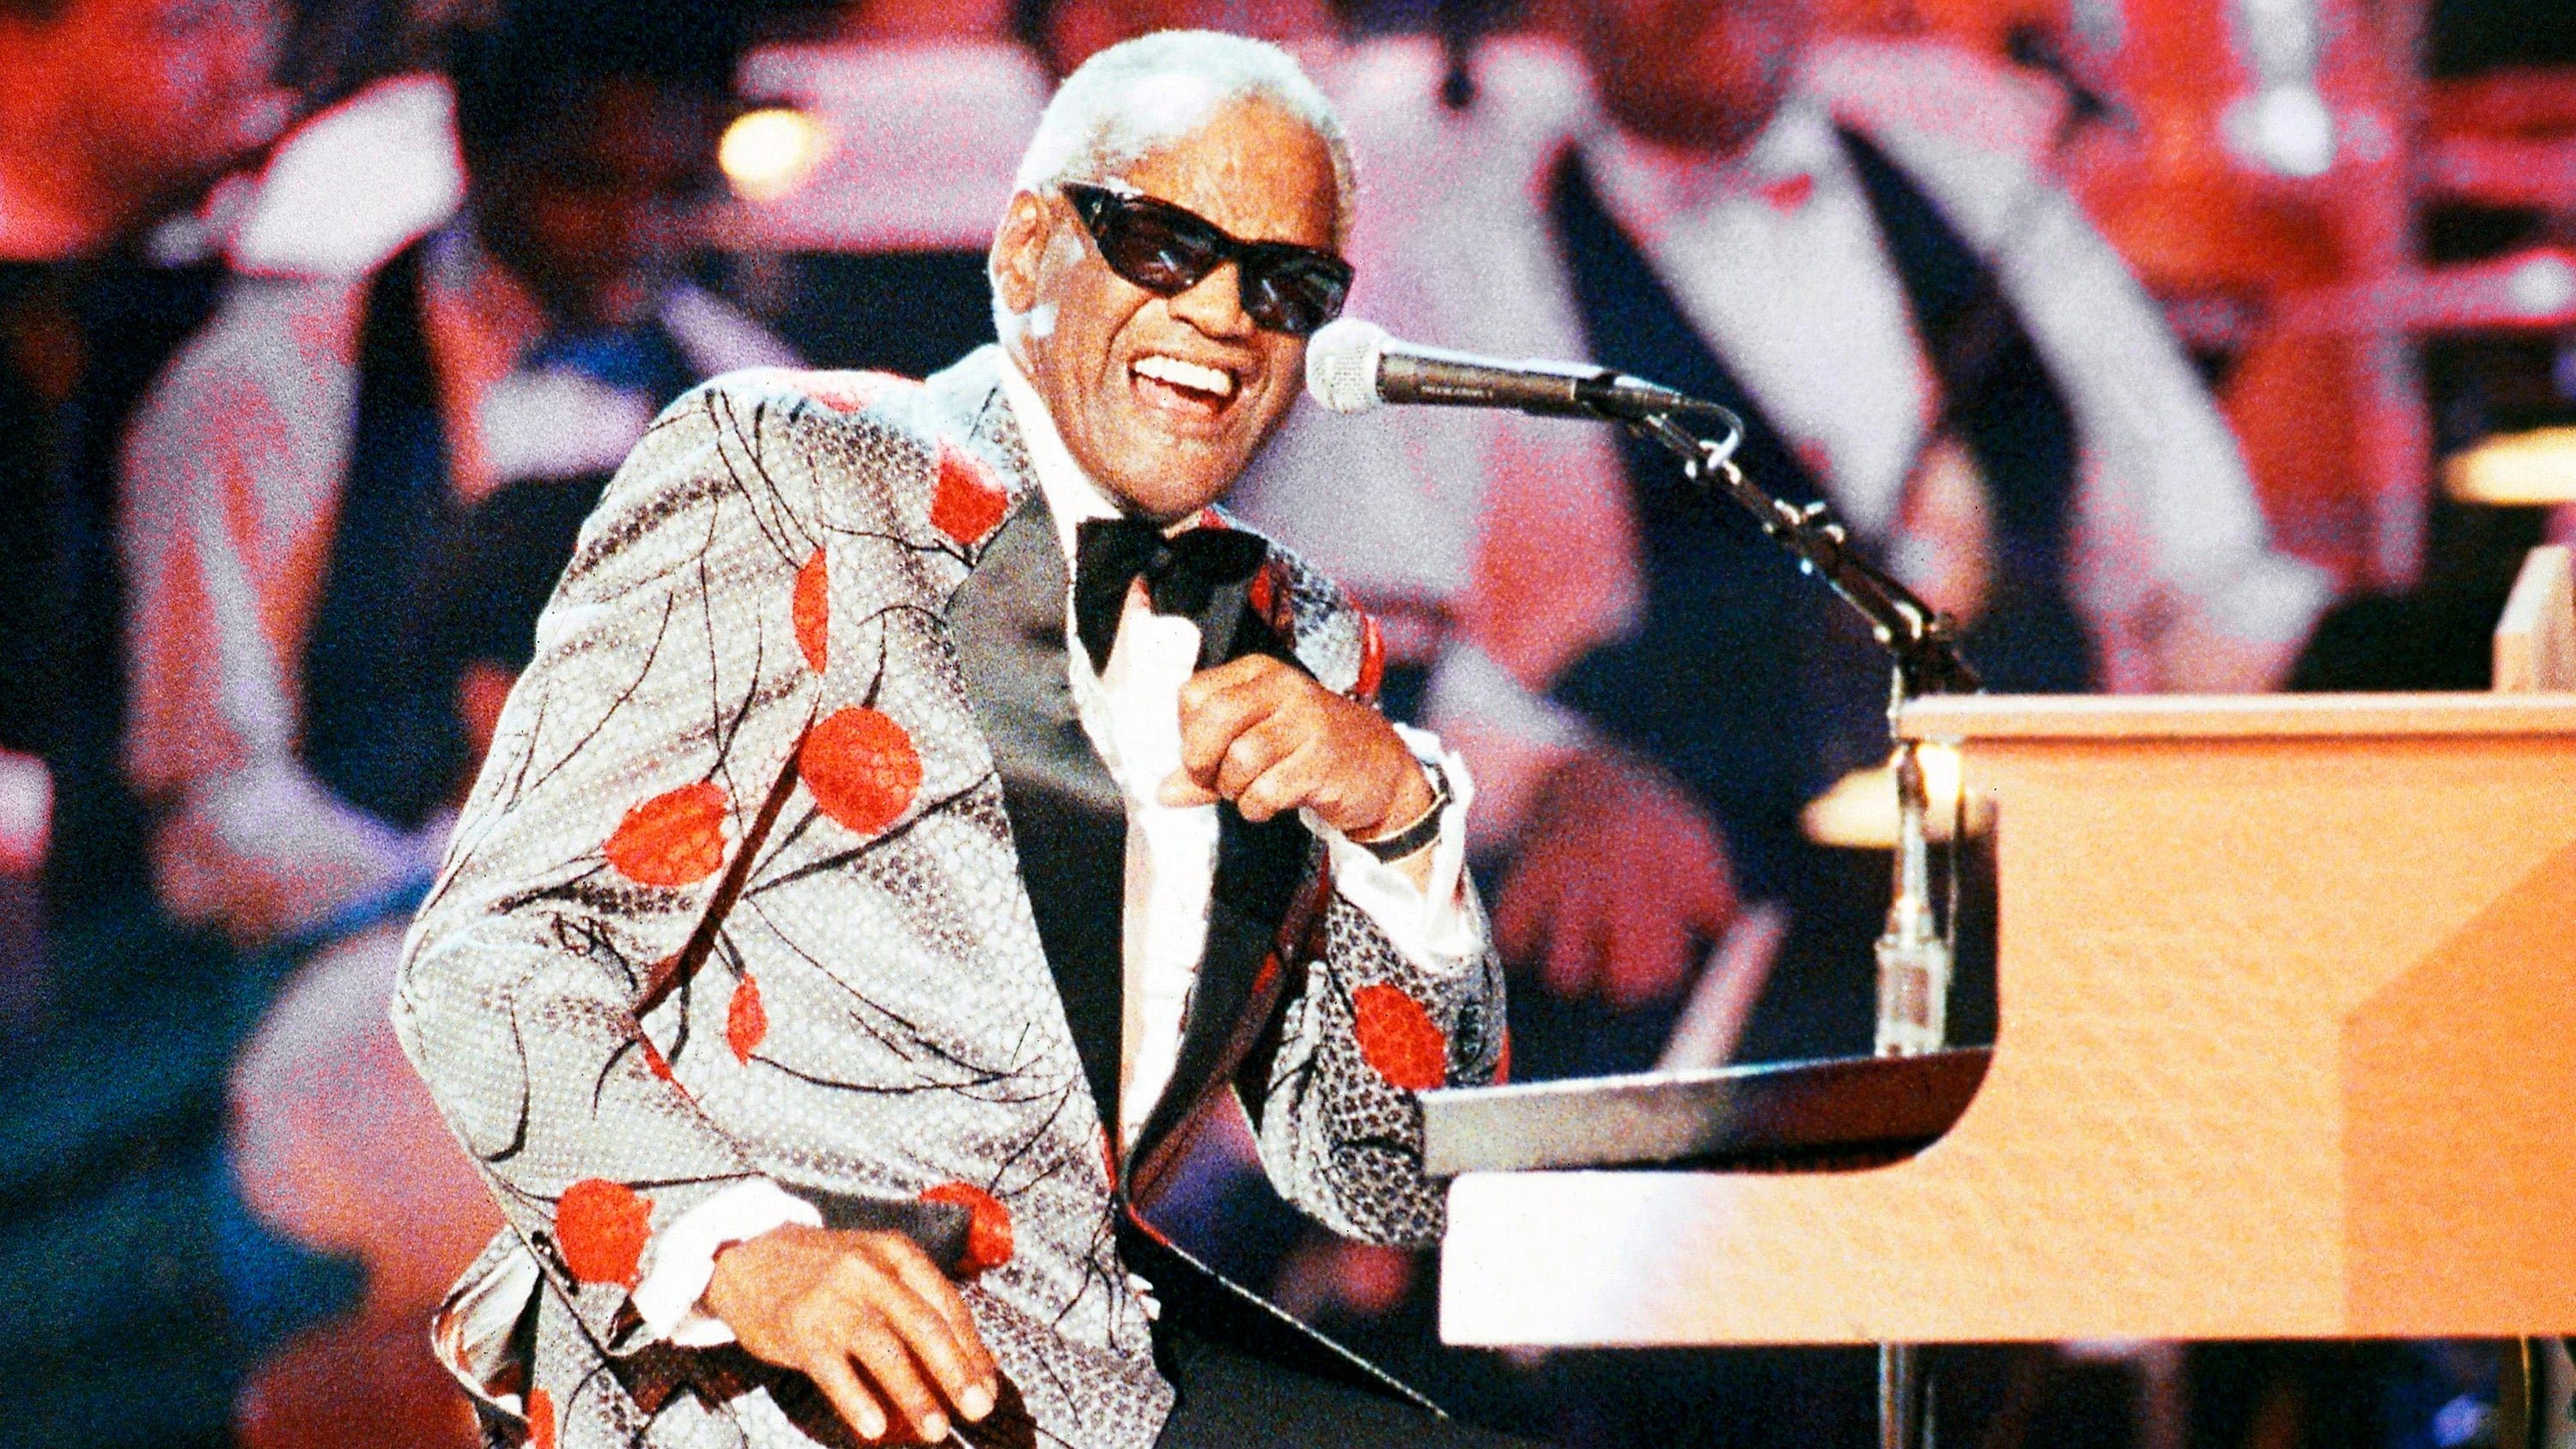 Ray Charles and The Judds to join Country Music Hall of Fame